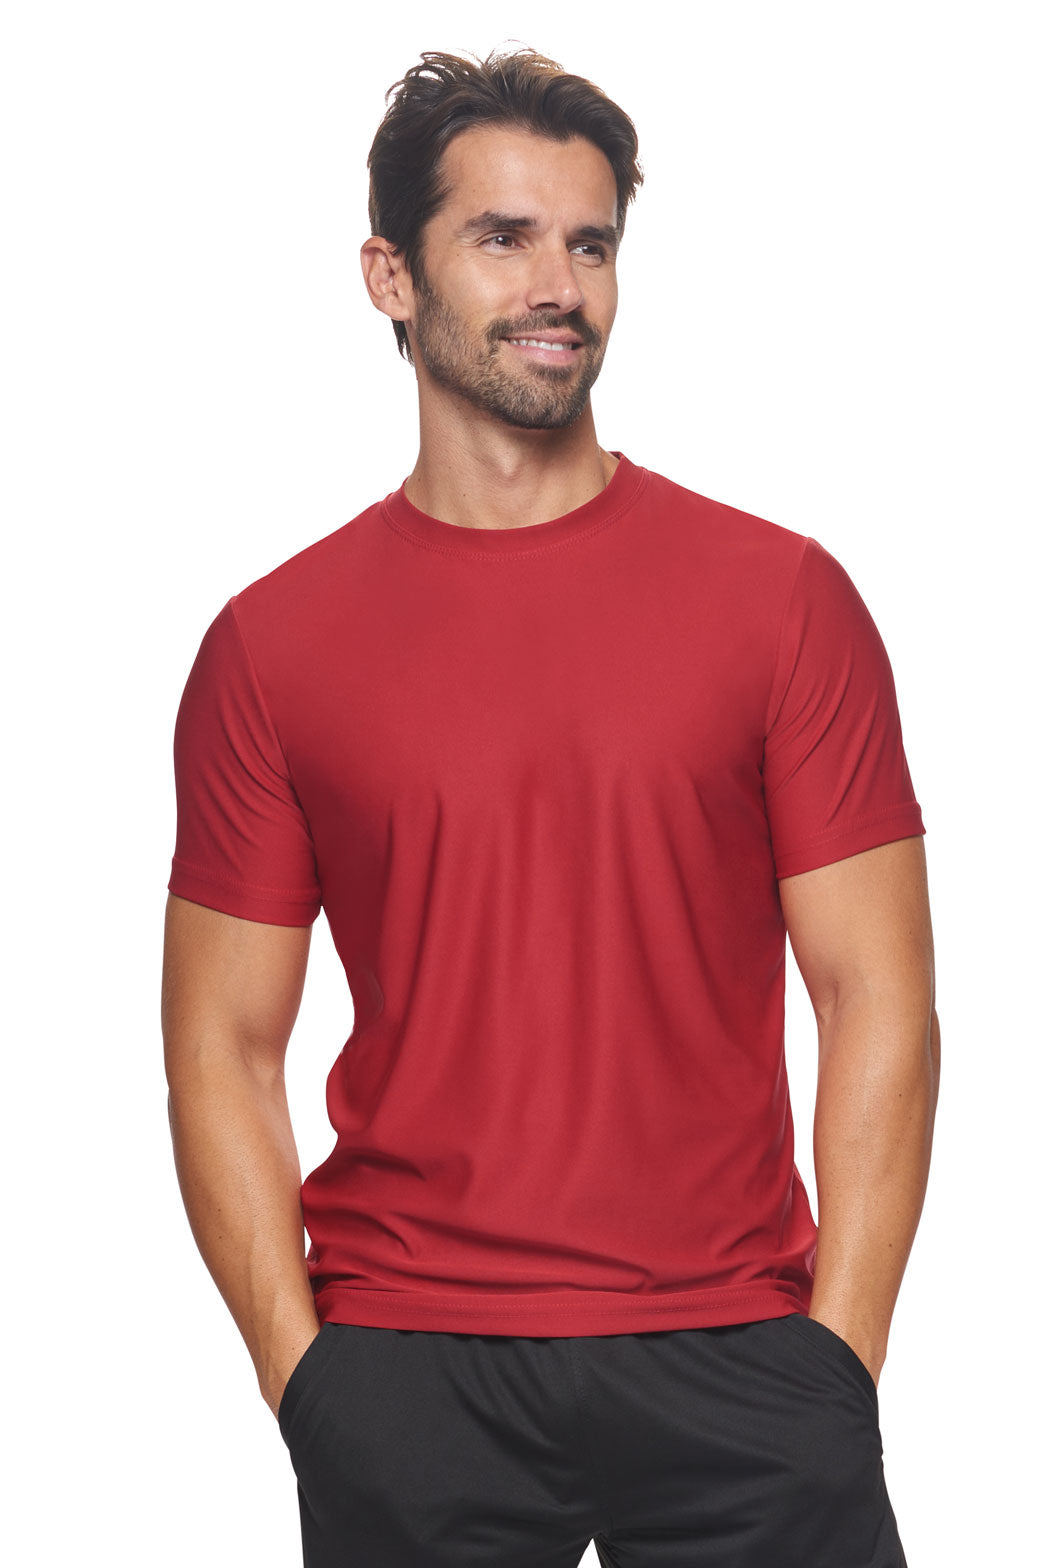 Expert Brand Wholesale Made in USA Recycled Polyester Repreve Performance Tee Unisex RP801U Poinsettia#poinsettia